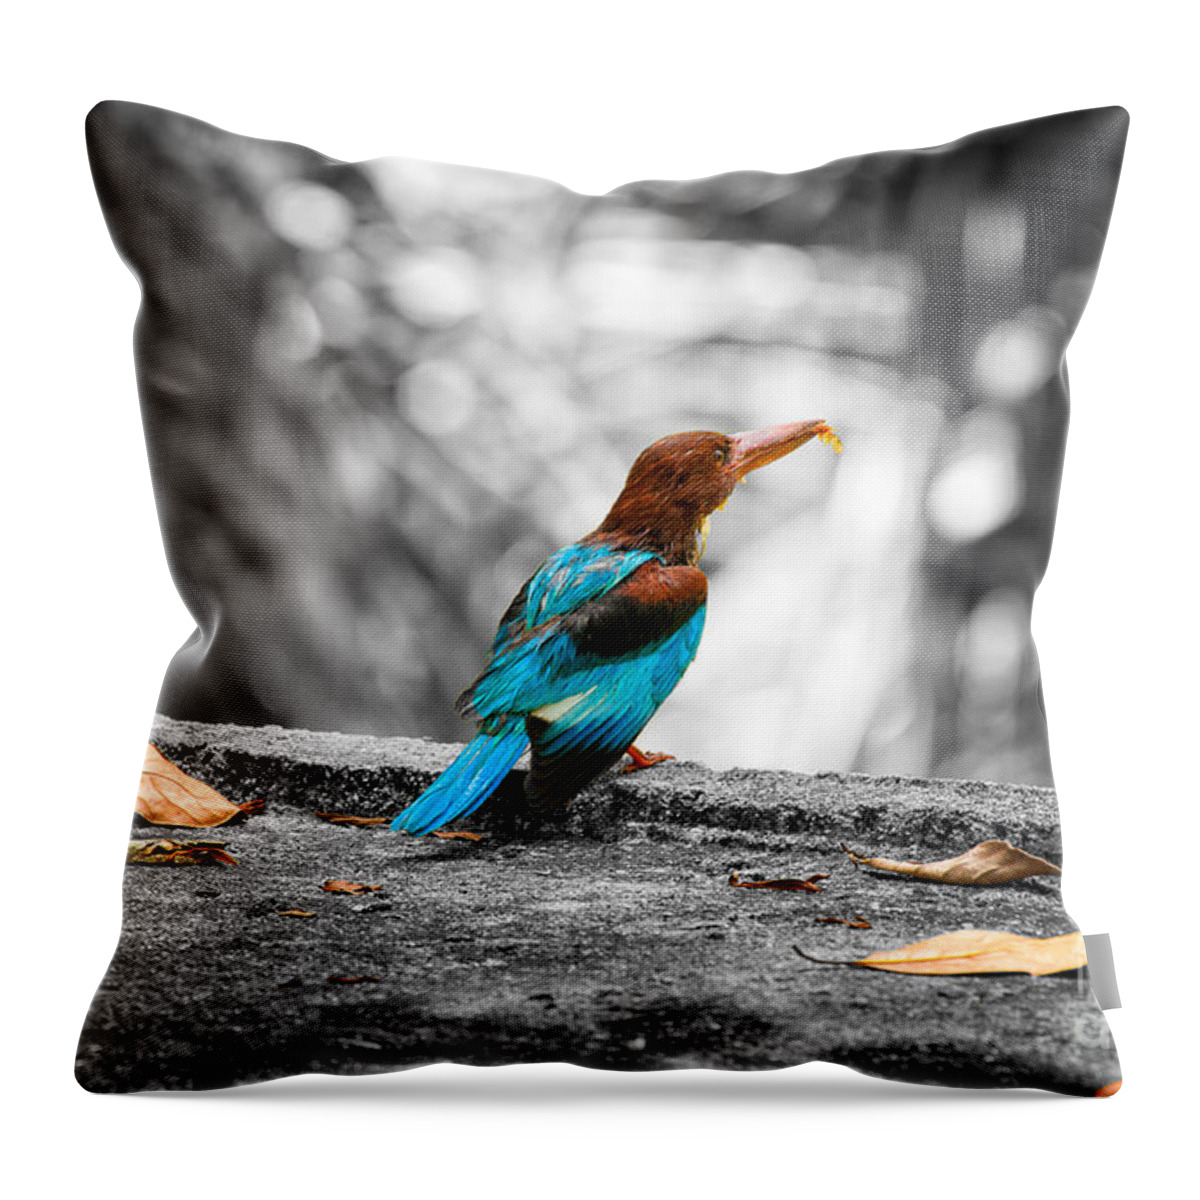 Kingfisher Carrying A Prey Throw Pillow featuring the photograph Kingfisher by Venura Herath